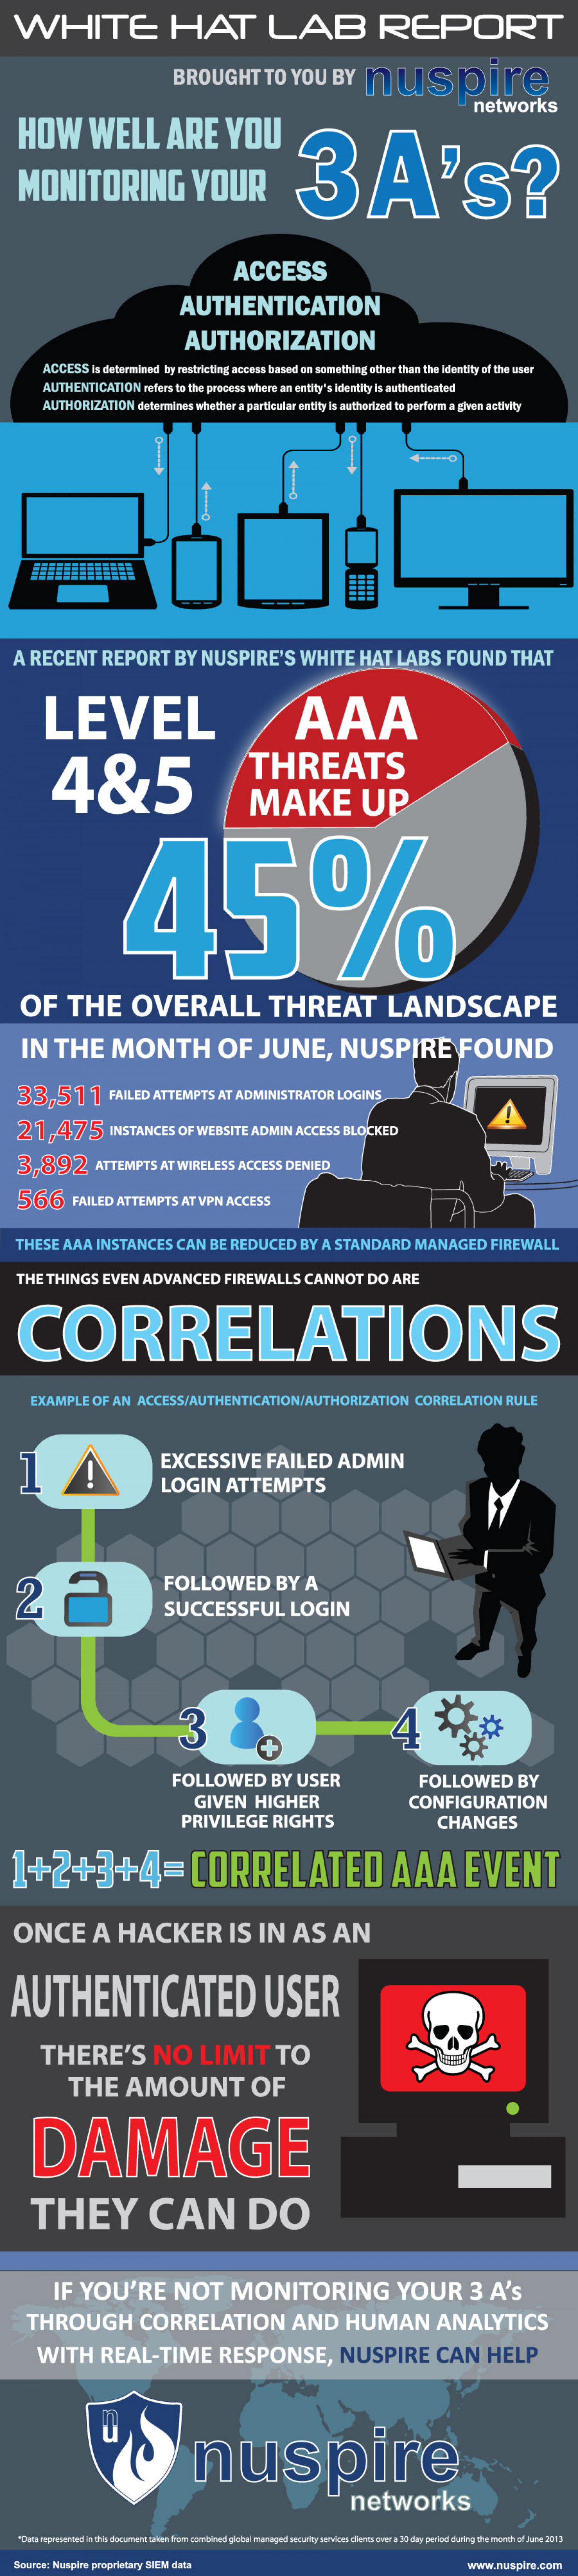 How Well Are You Monitoring Your 3A's? Infographic